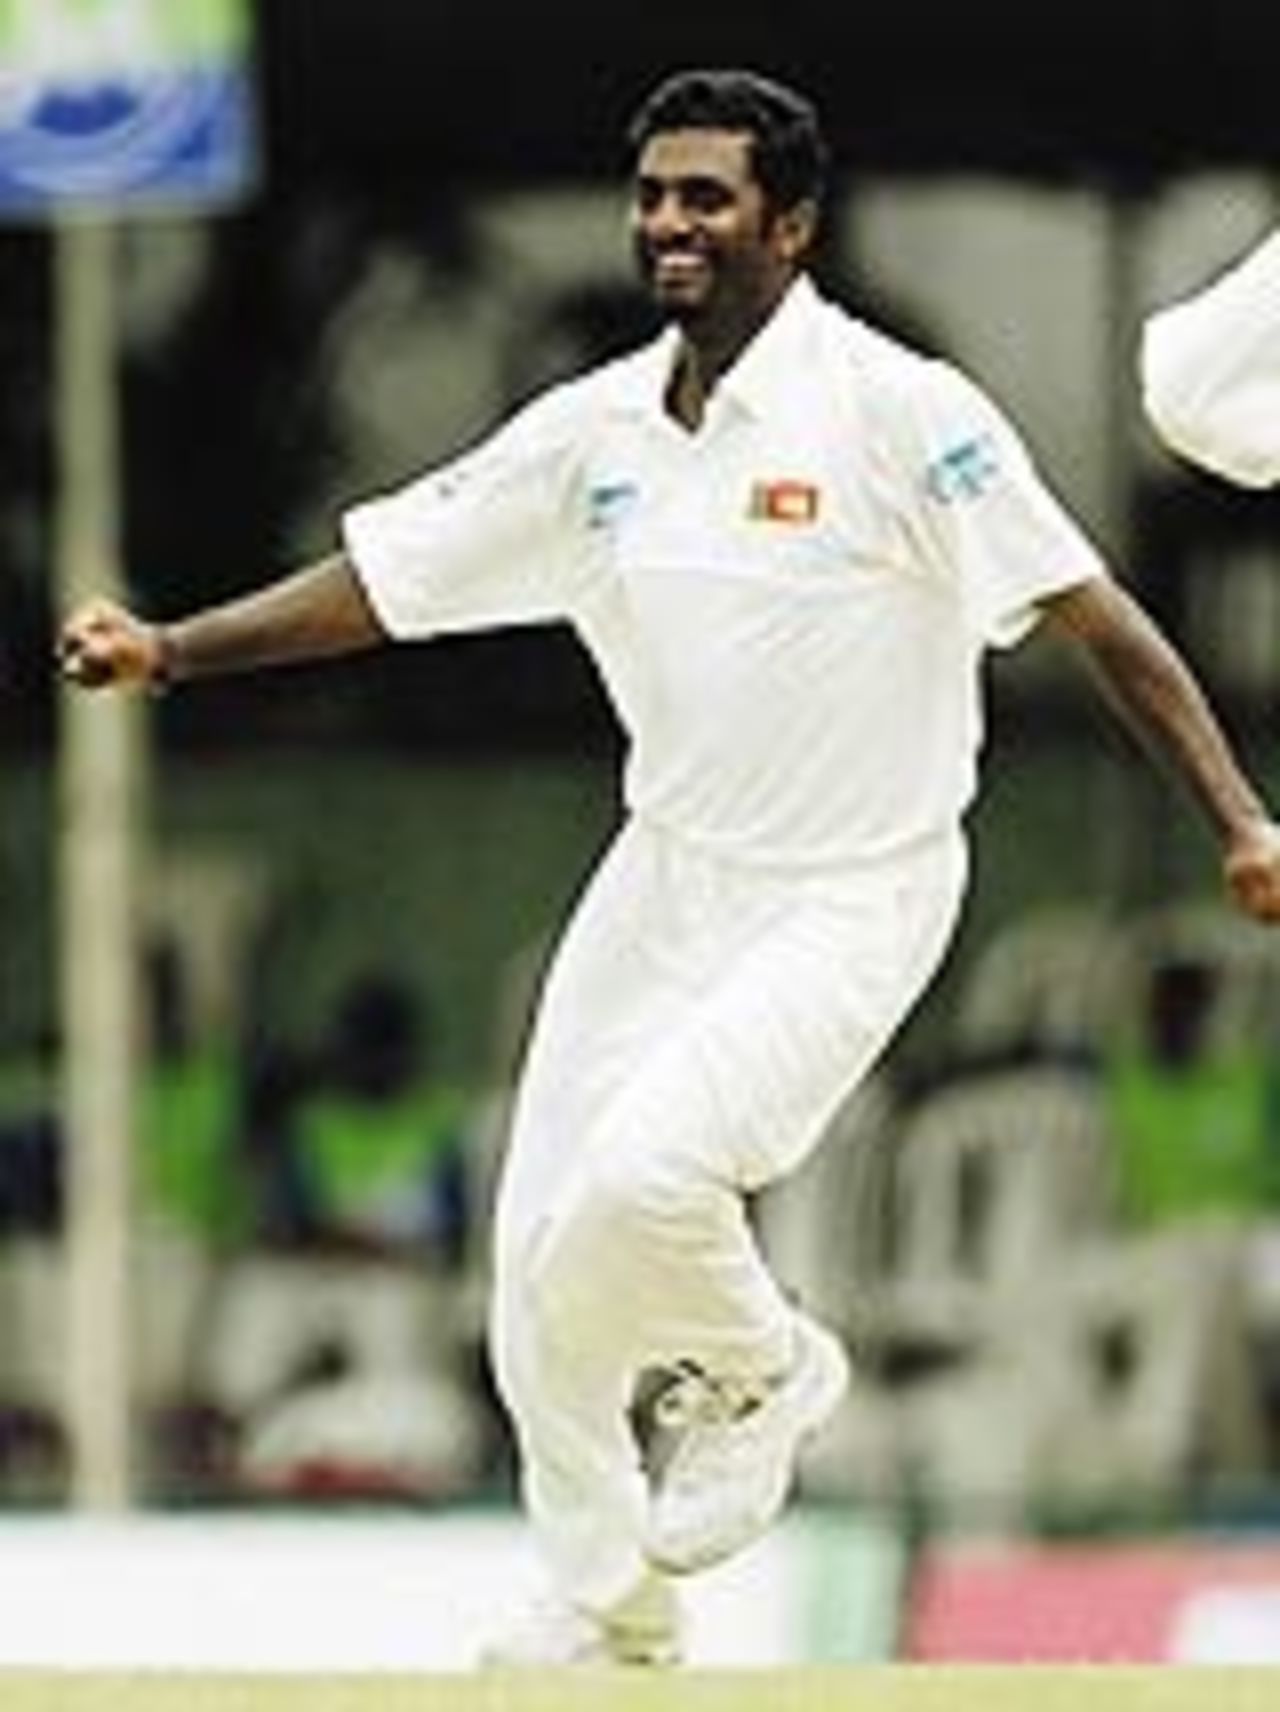 Muttiah Muralitharan rejoices after getting his 500th Test wicket, Sri Lanka v Australia, 2nd Test, Kandy, 1st day, March 16, 2004